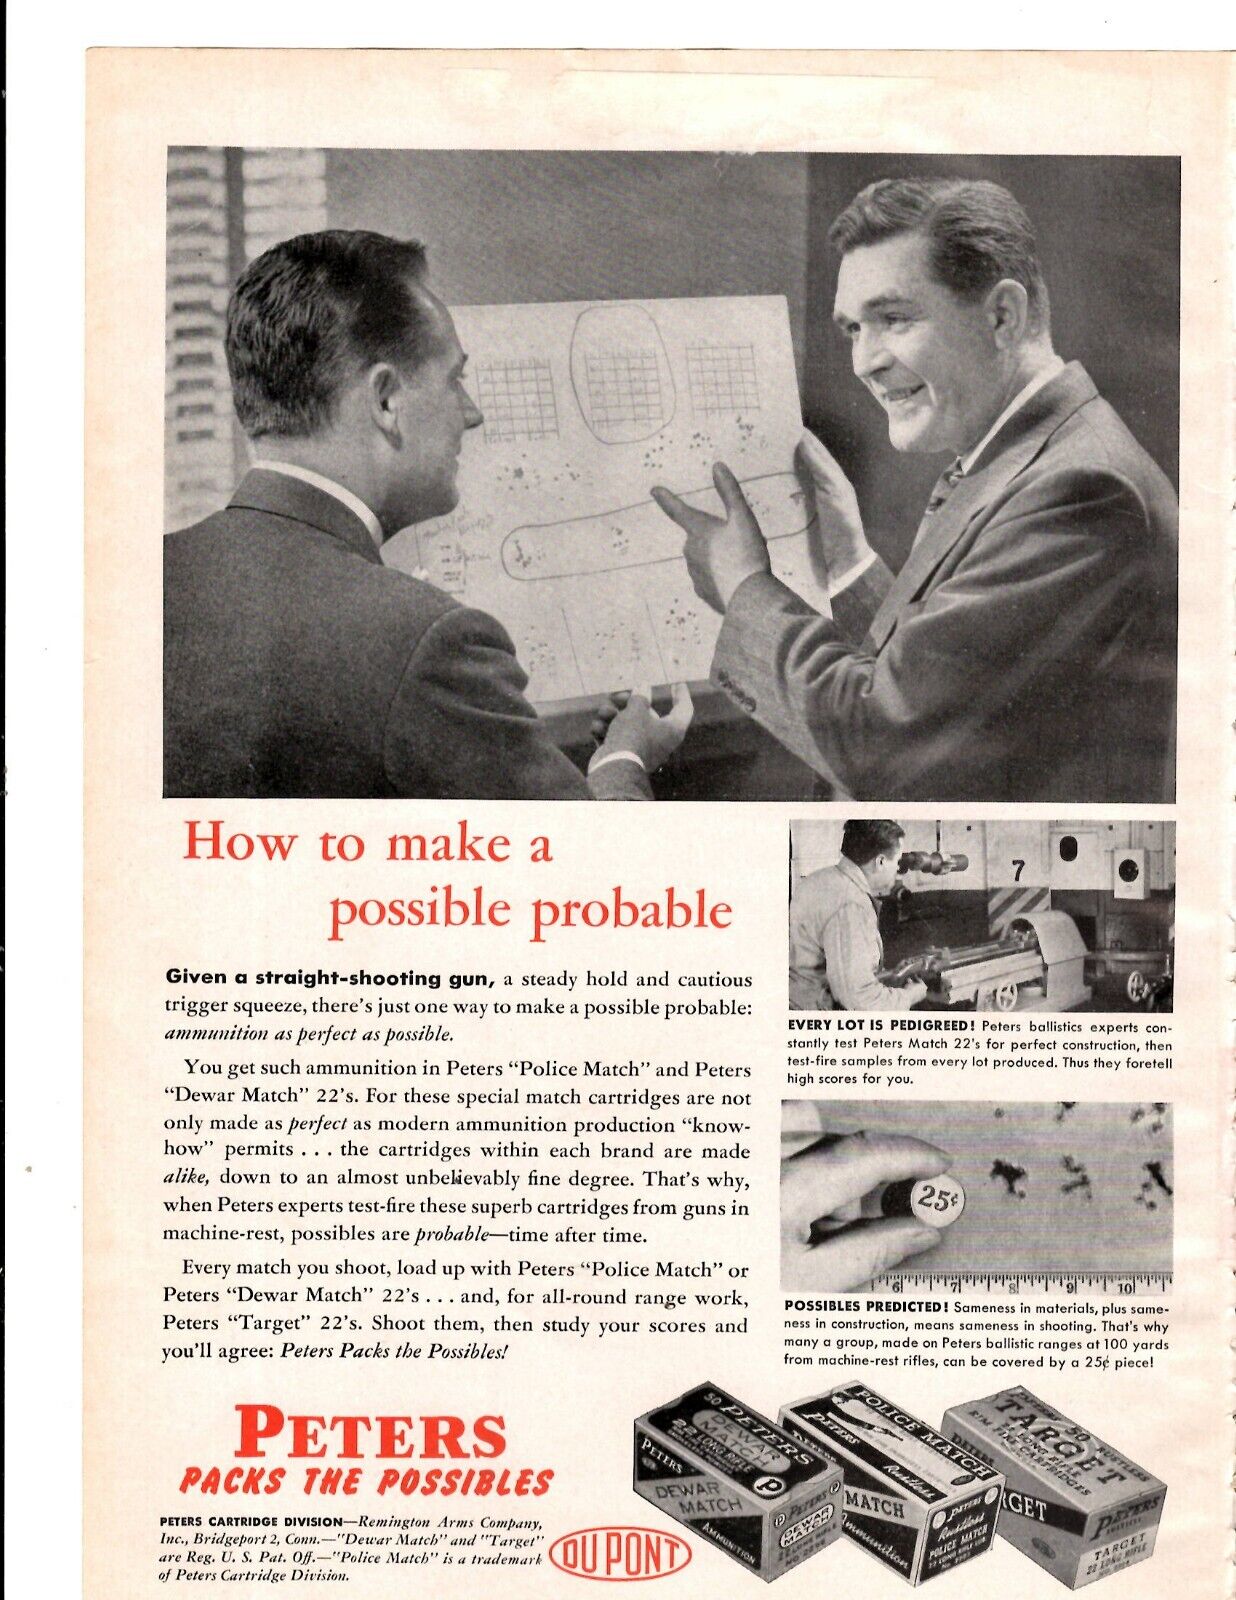 1948 Print Ad Peters Cartridge Division Du Pont How to make possible probable